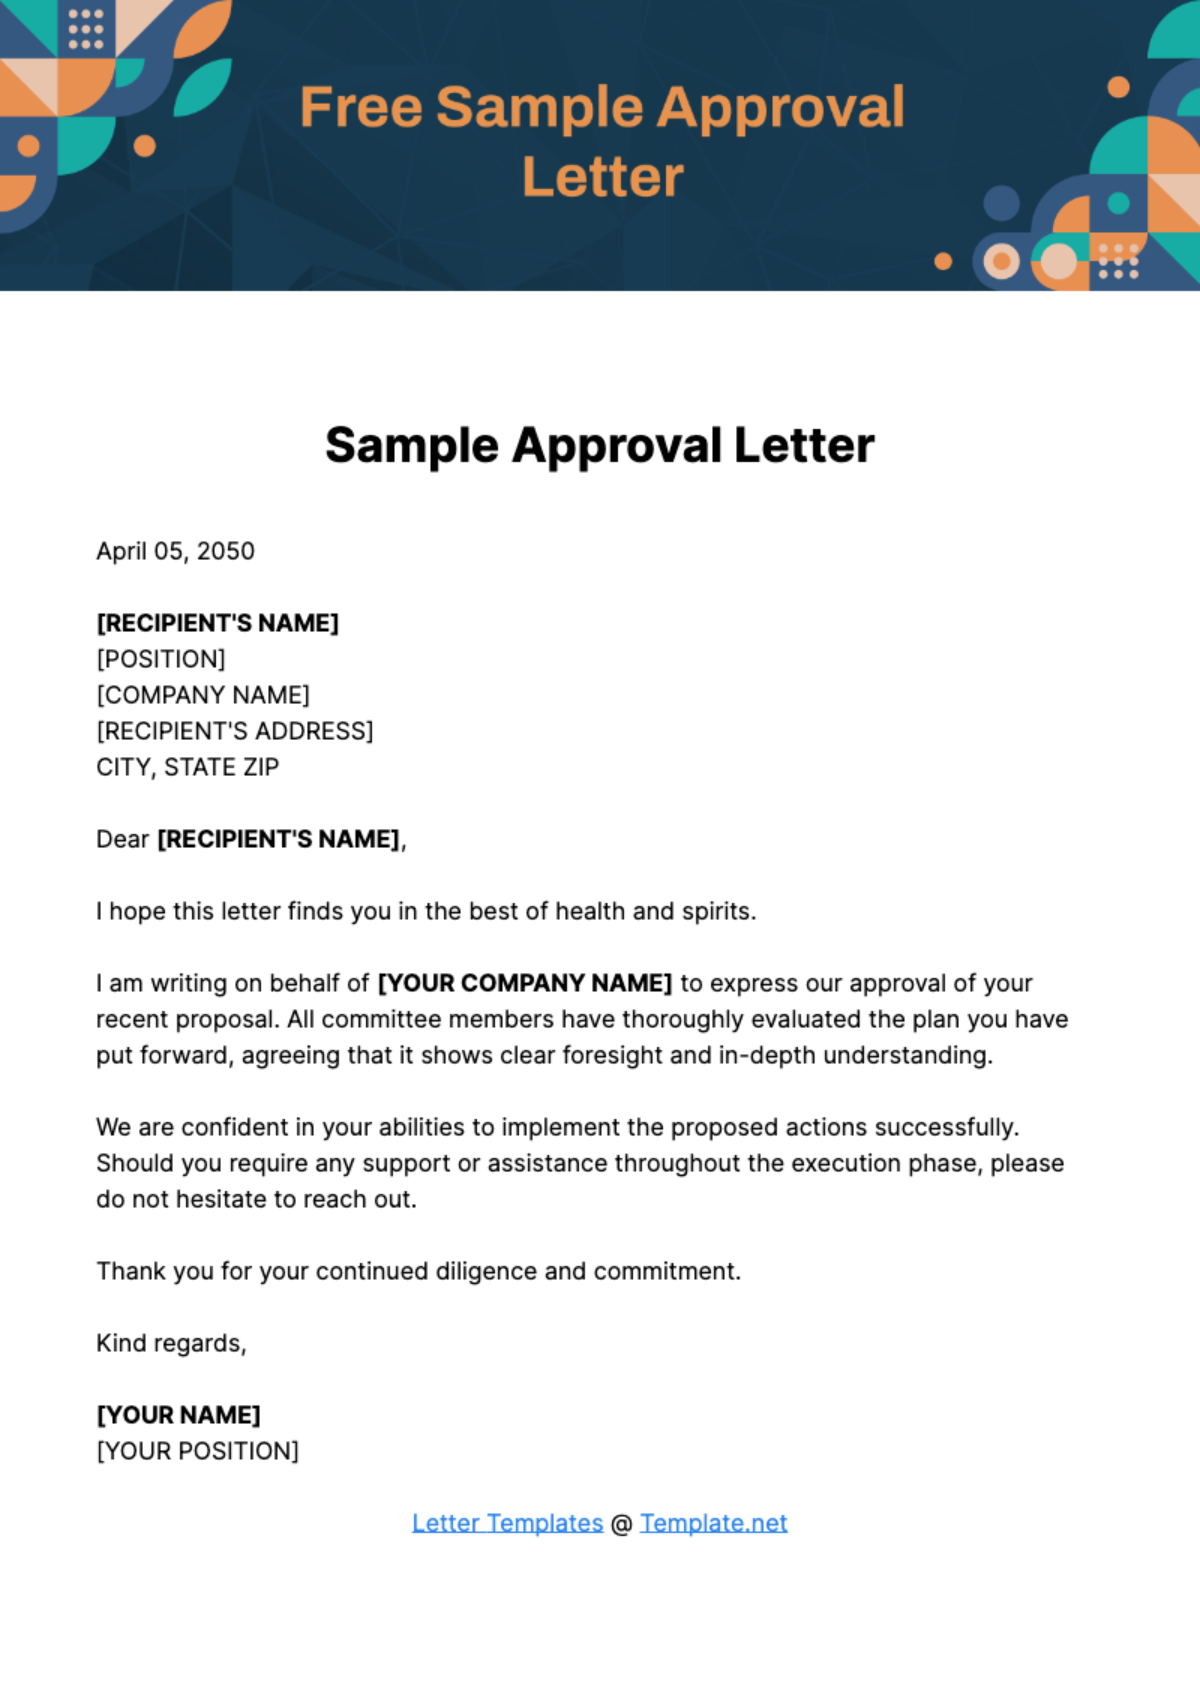 Free Sample Approval Letter Template